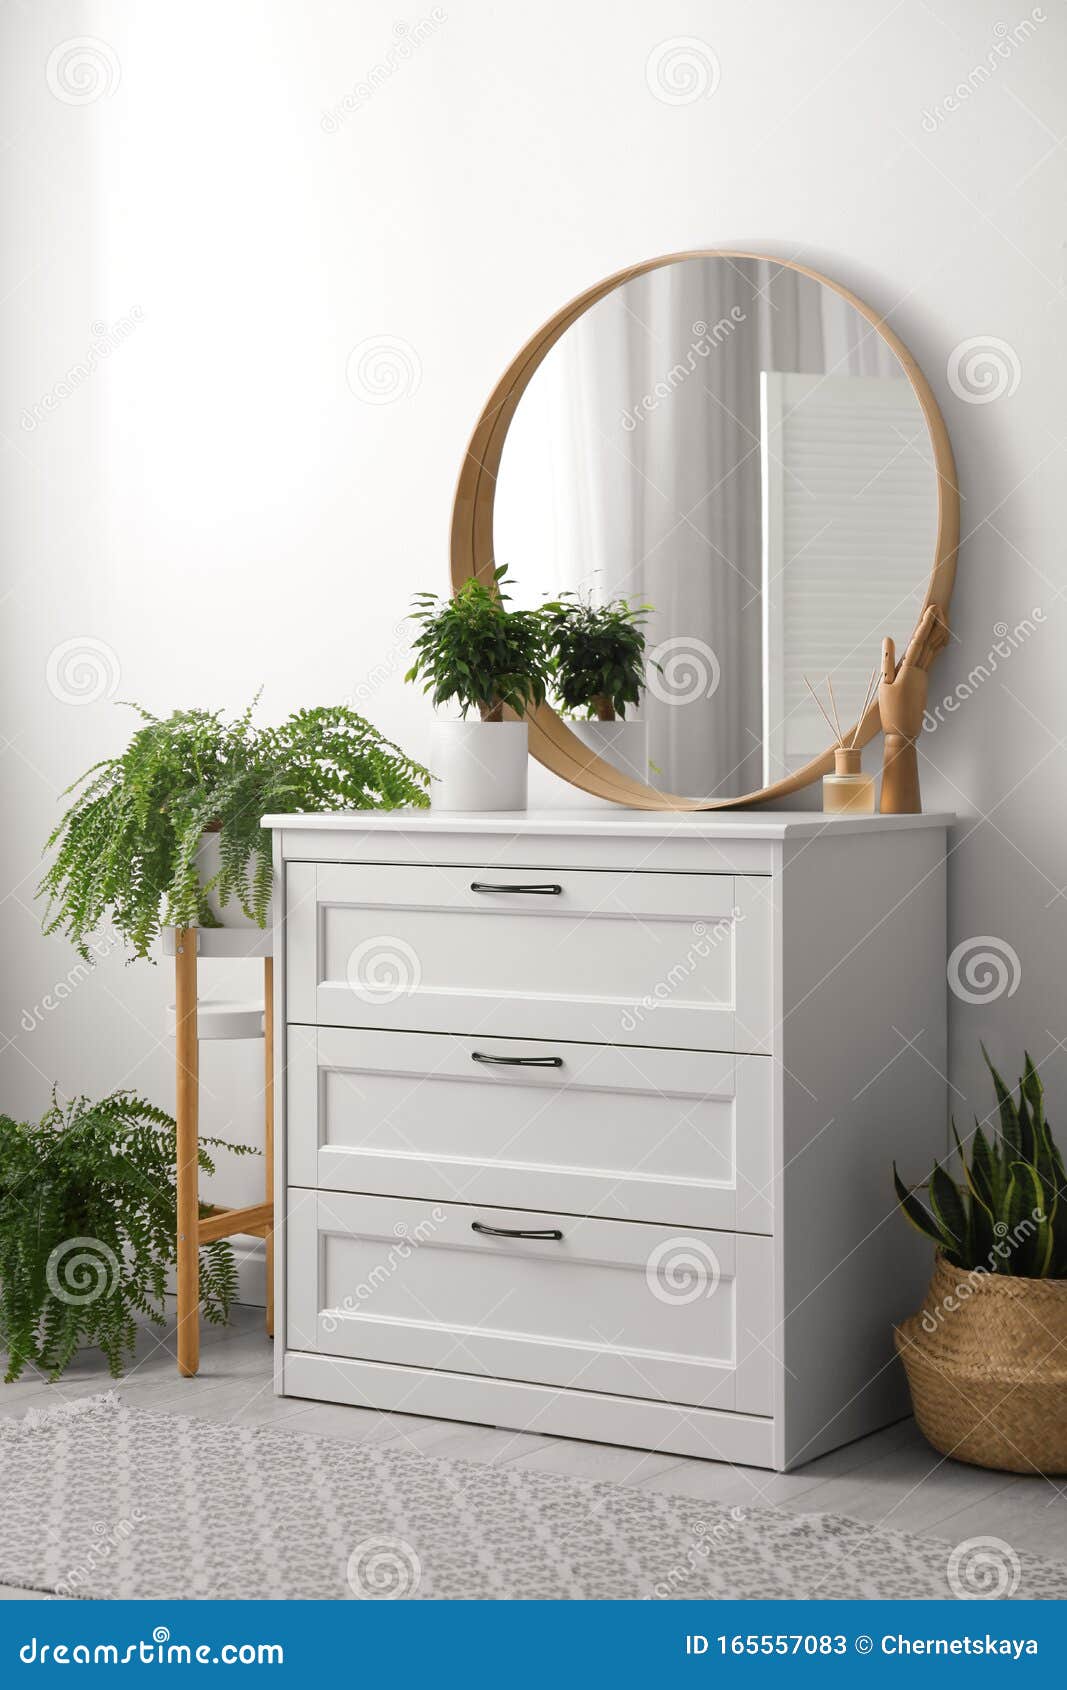 Round Mirror And Chest Of Drawers Near White Wall In Room Modern